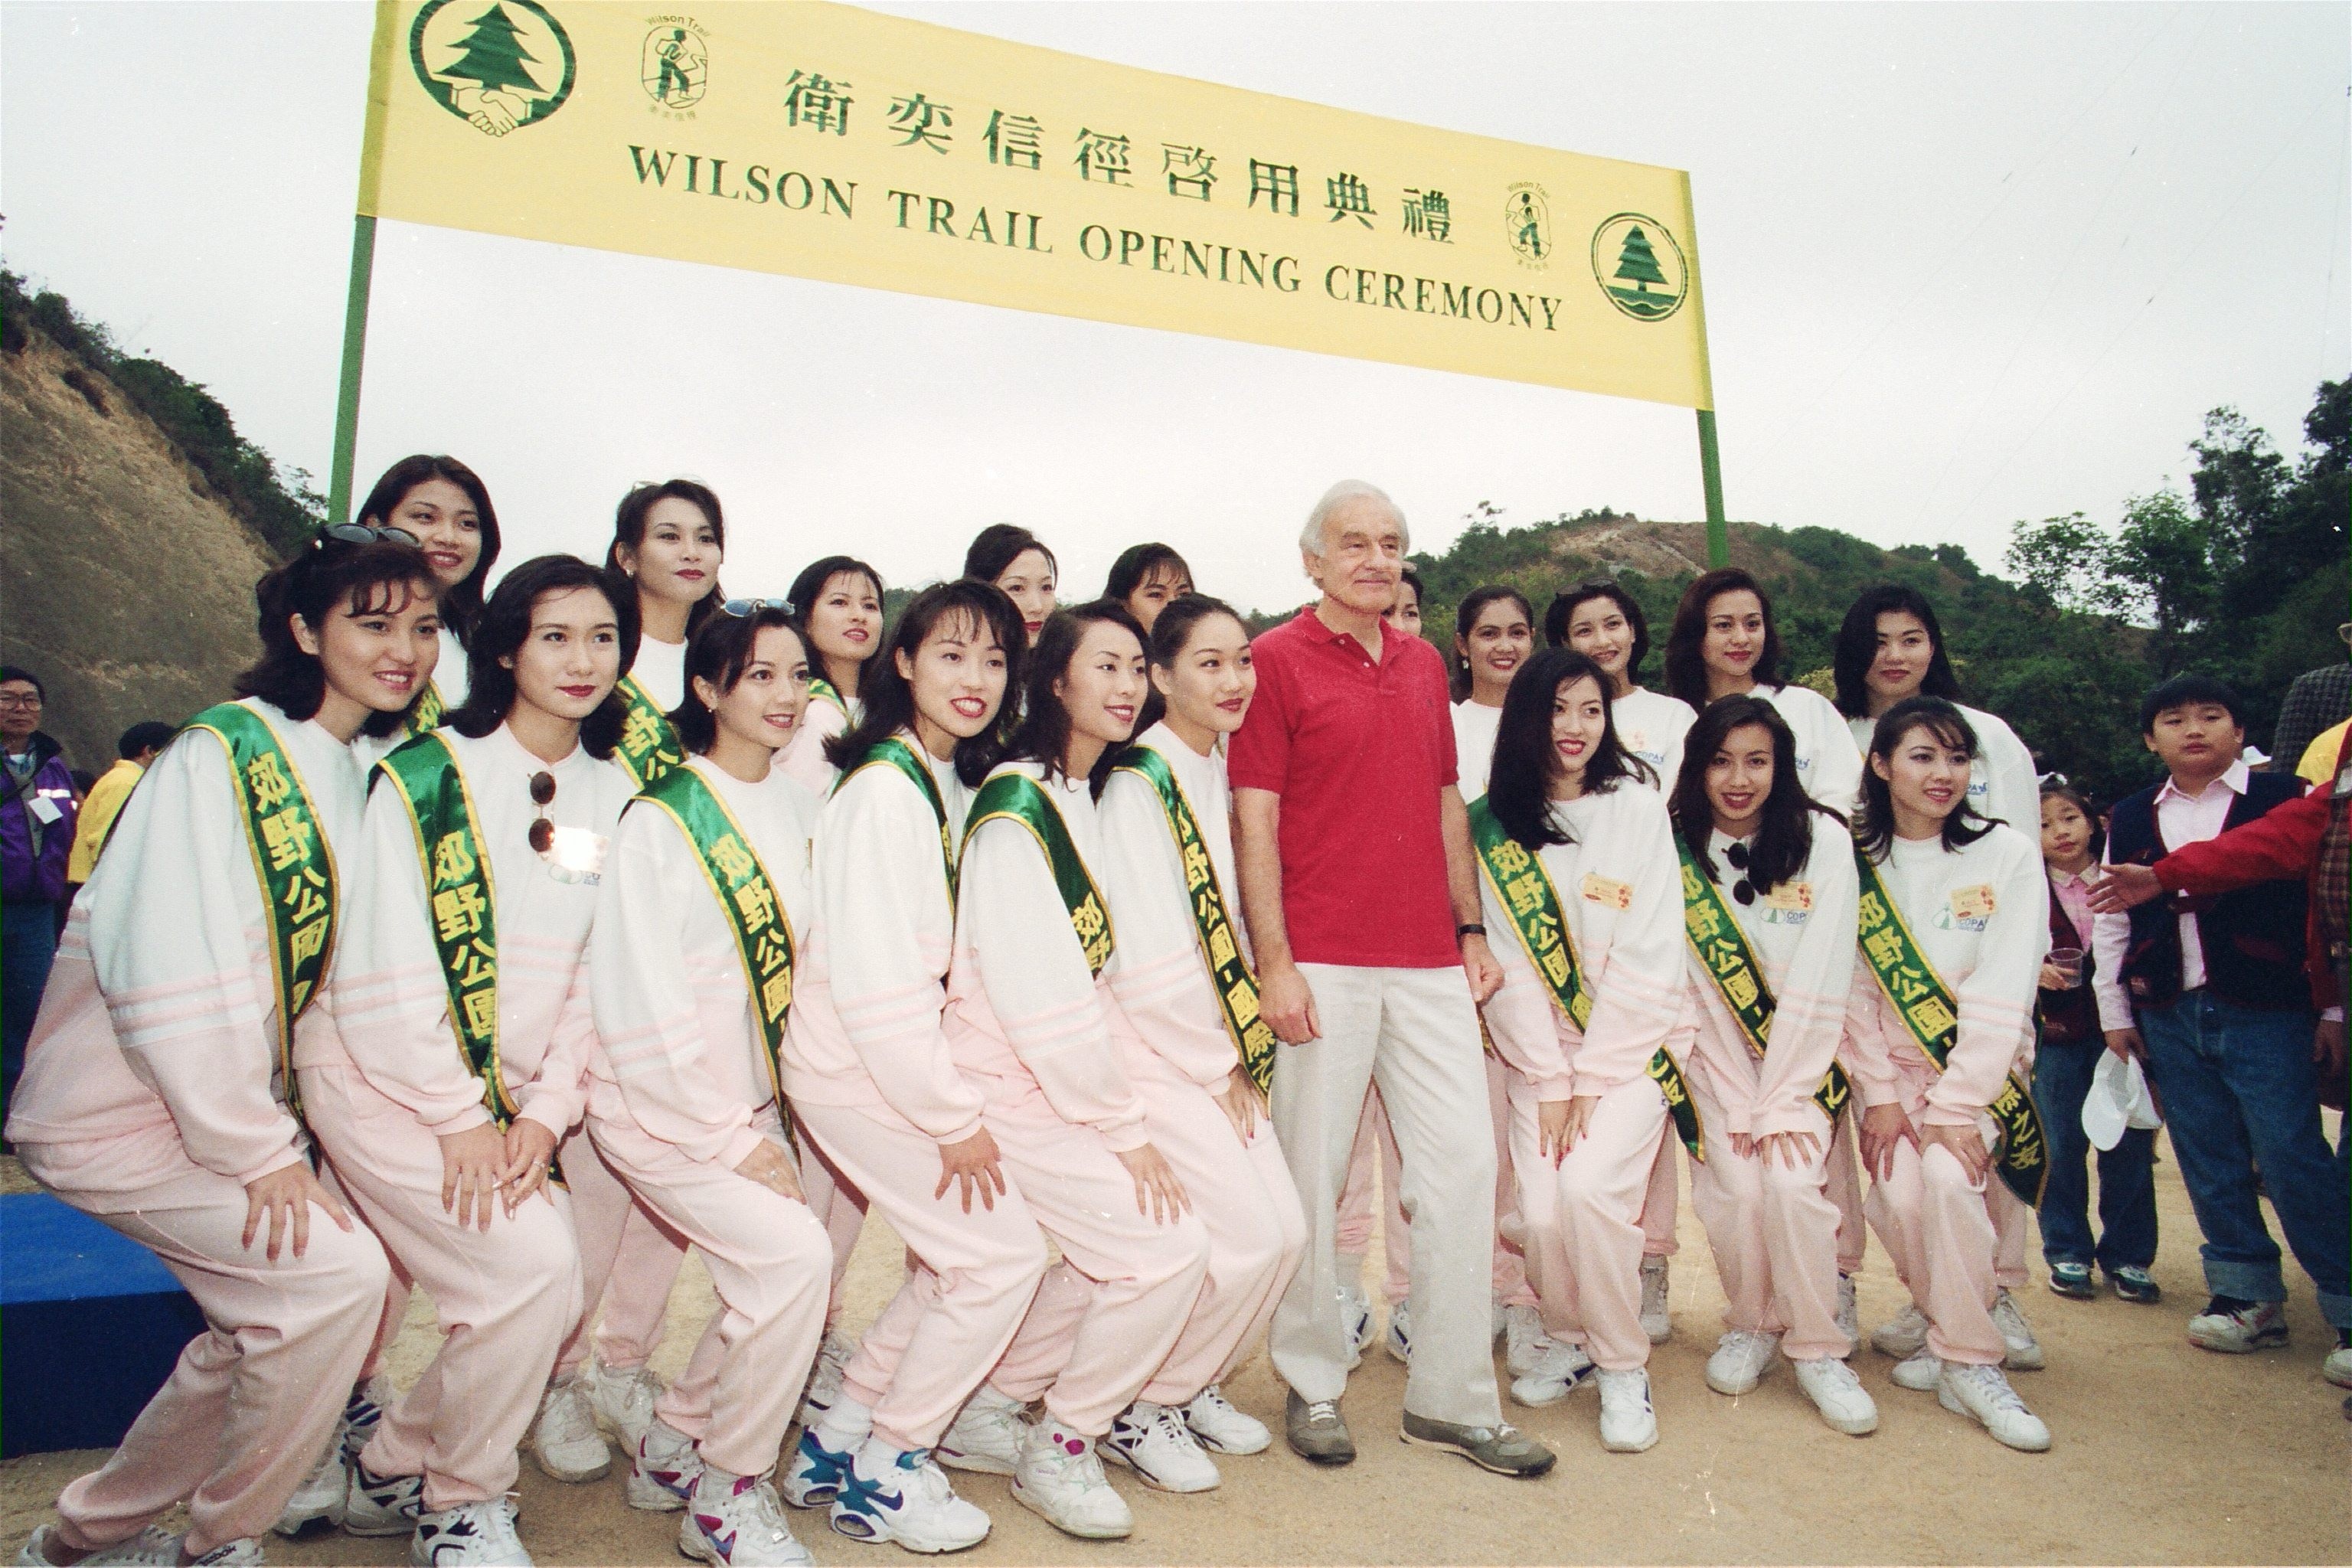 David Wilson poses for a picture with the contestants in the Miss Chinese International beauty pageant during the opening ceremony of the Wilson Trail at the Kam Shan Country Park. Photo: SCMP Pictures